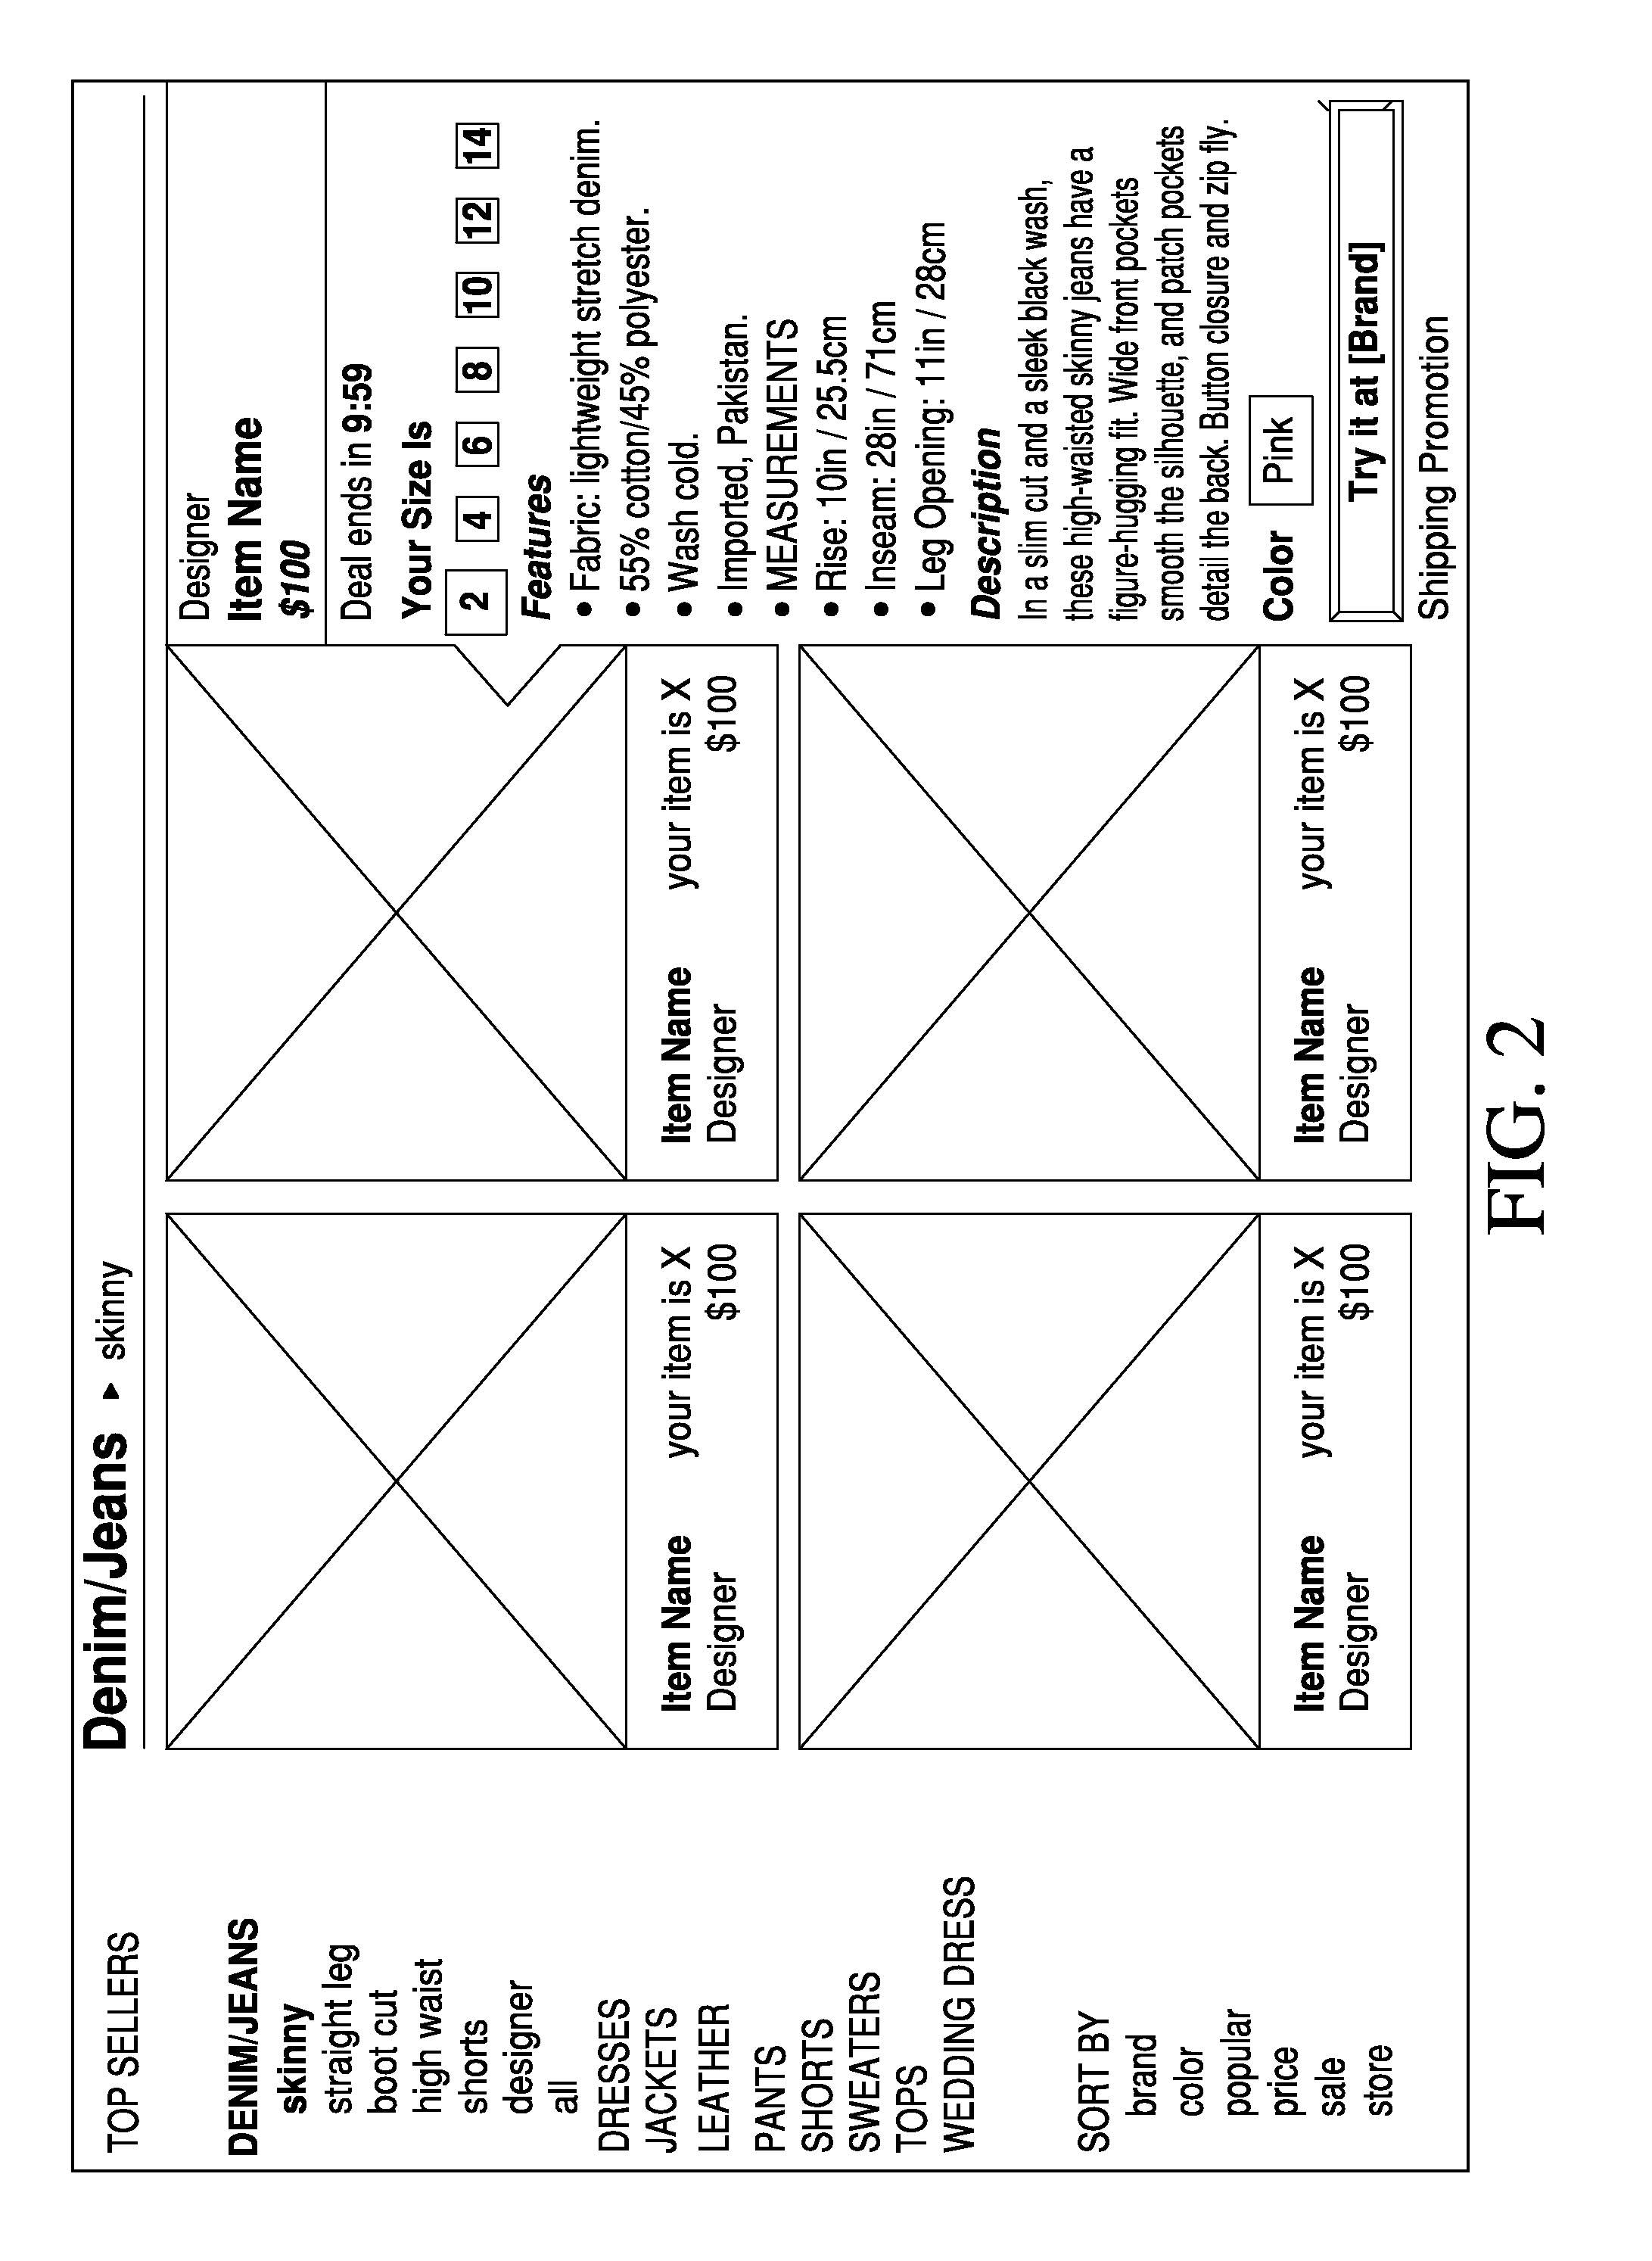 System and method for selecting the recommended size of an article of clothing